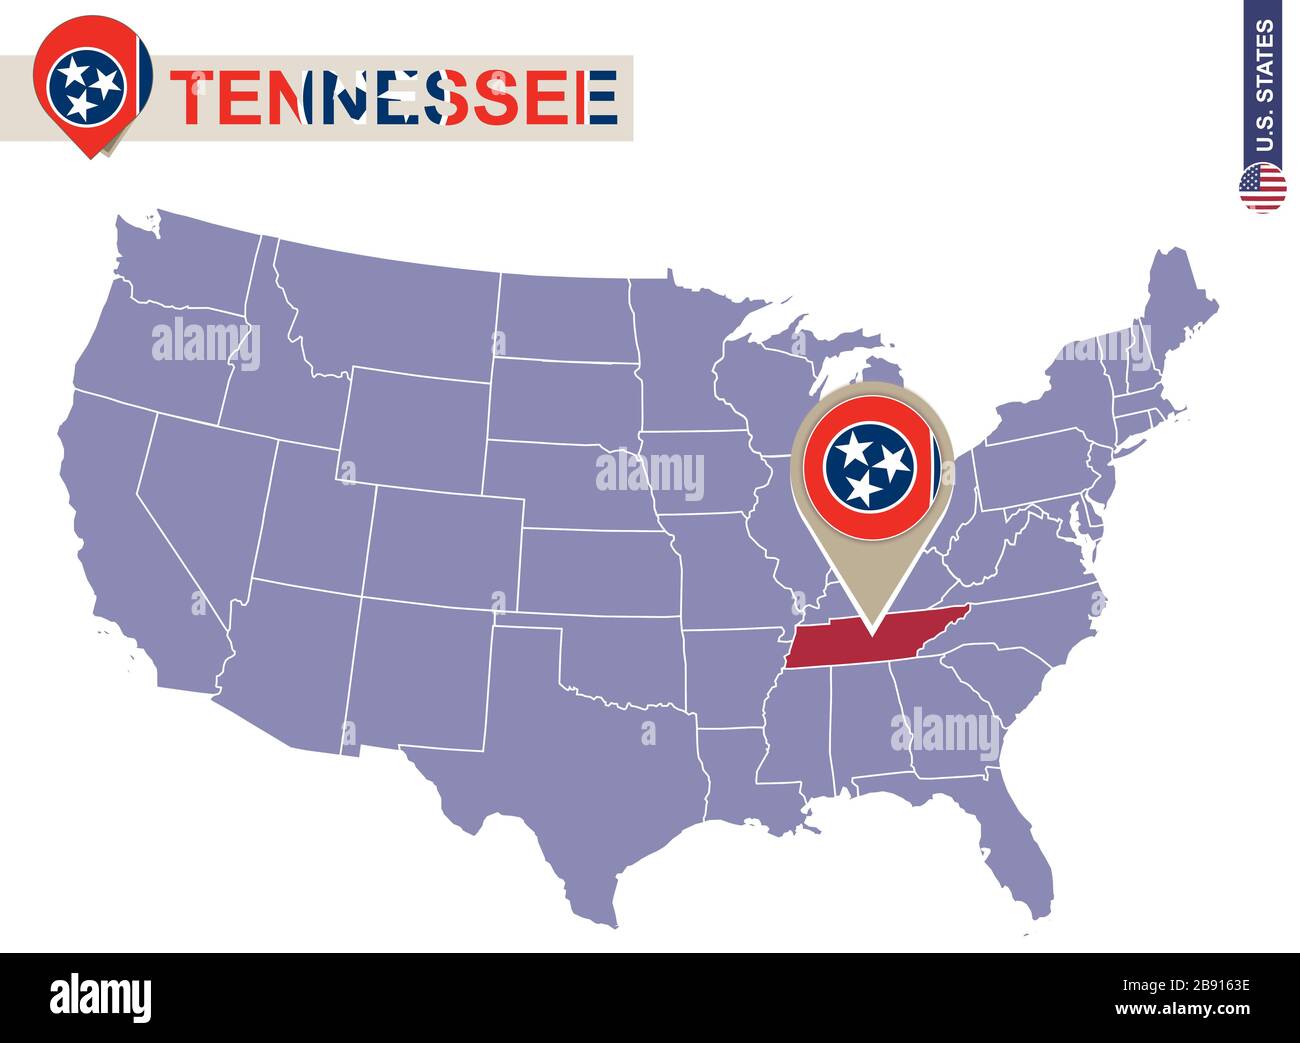 Tennessee State on USA Map. Tennessee flag and map. US States. Stock Vector